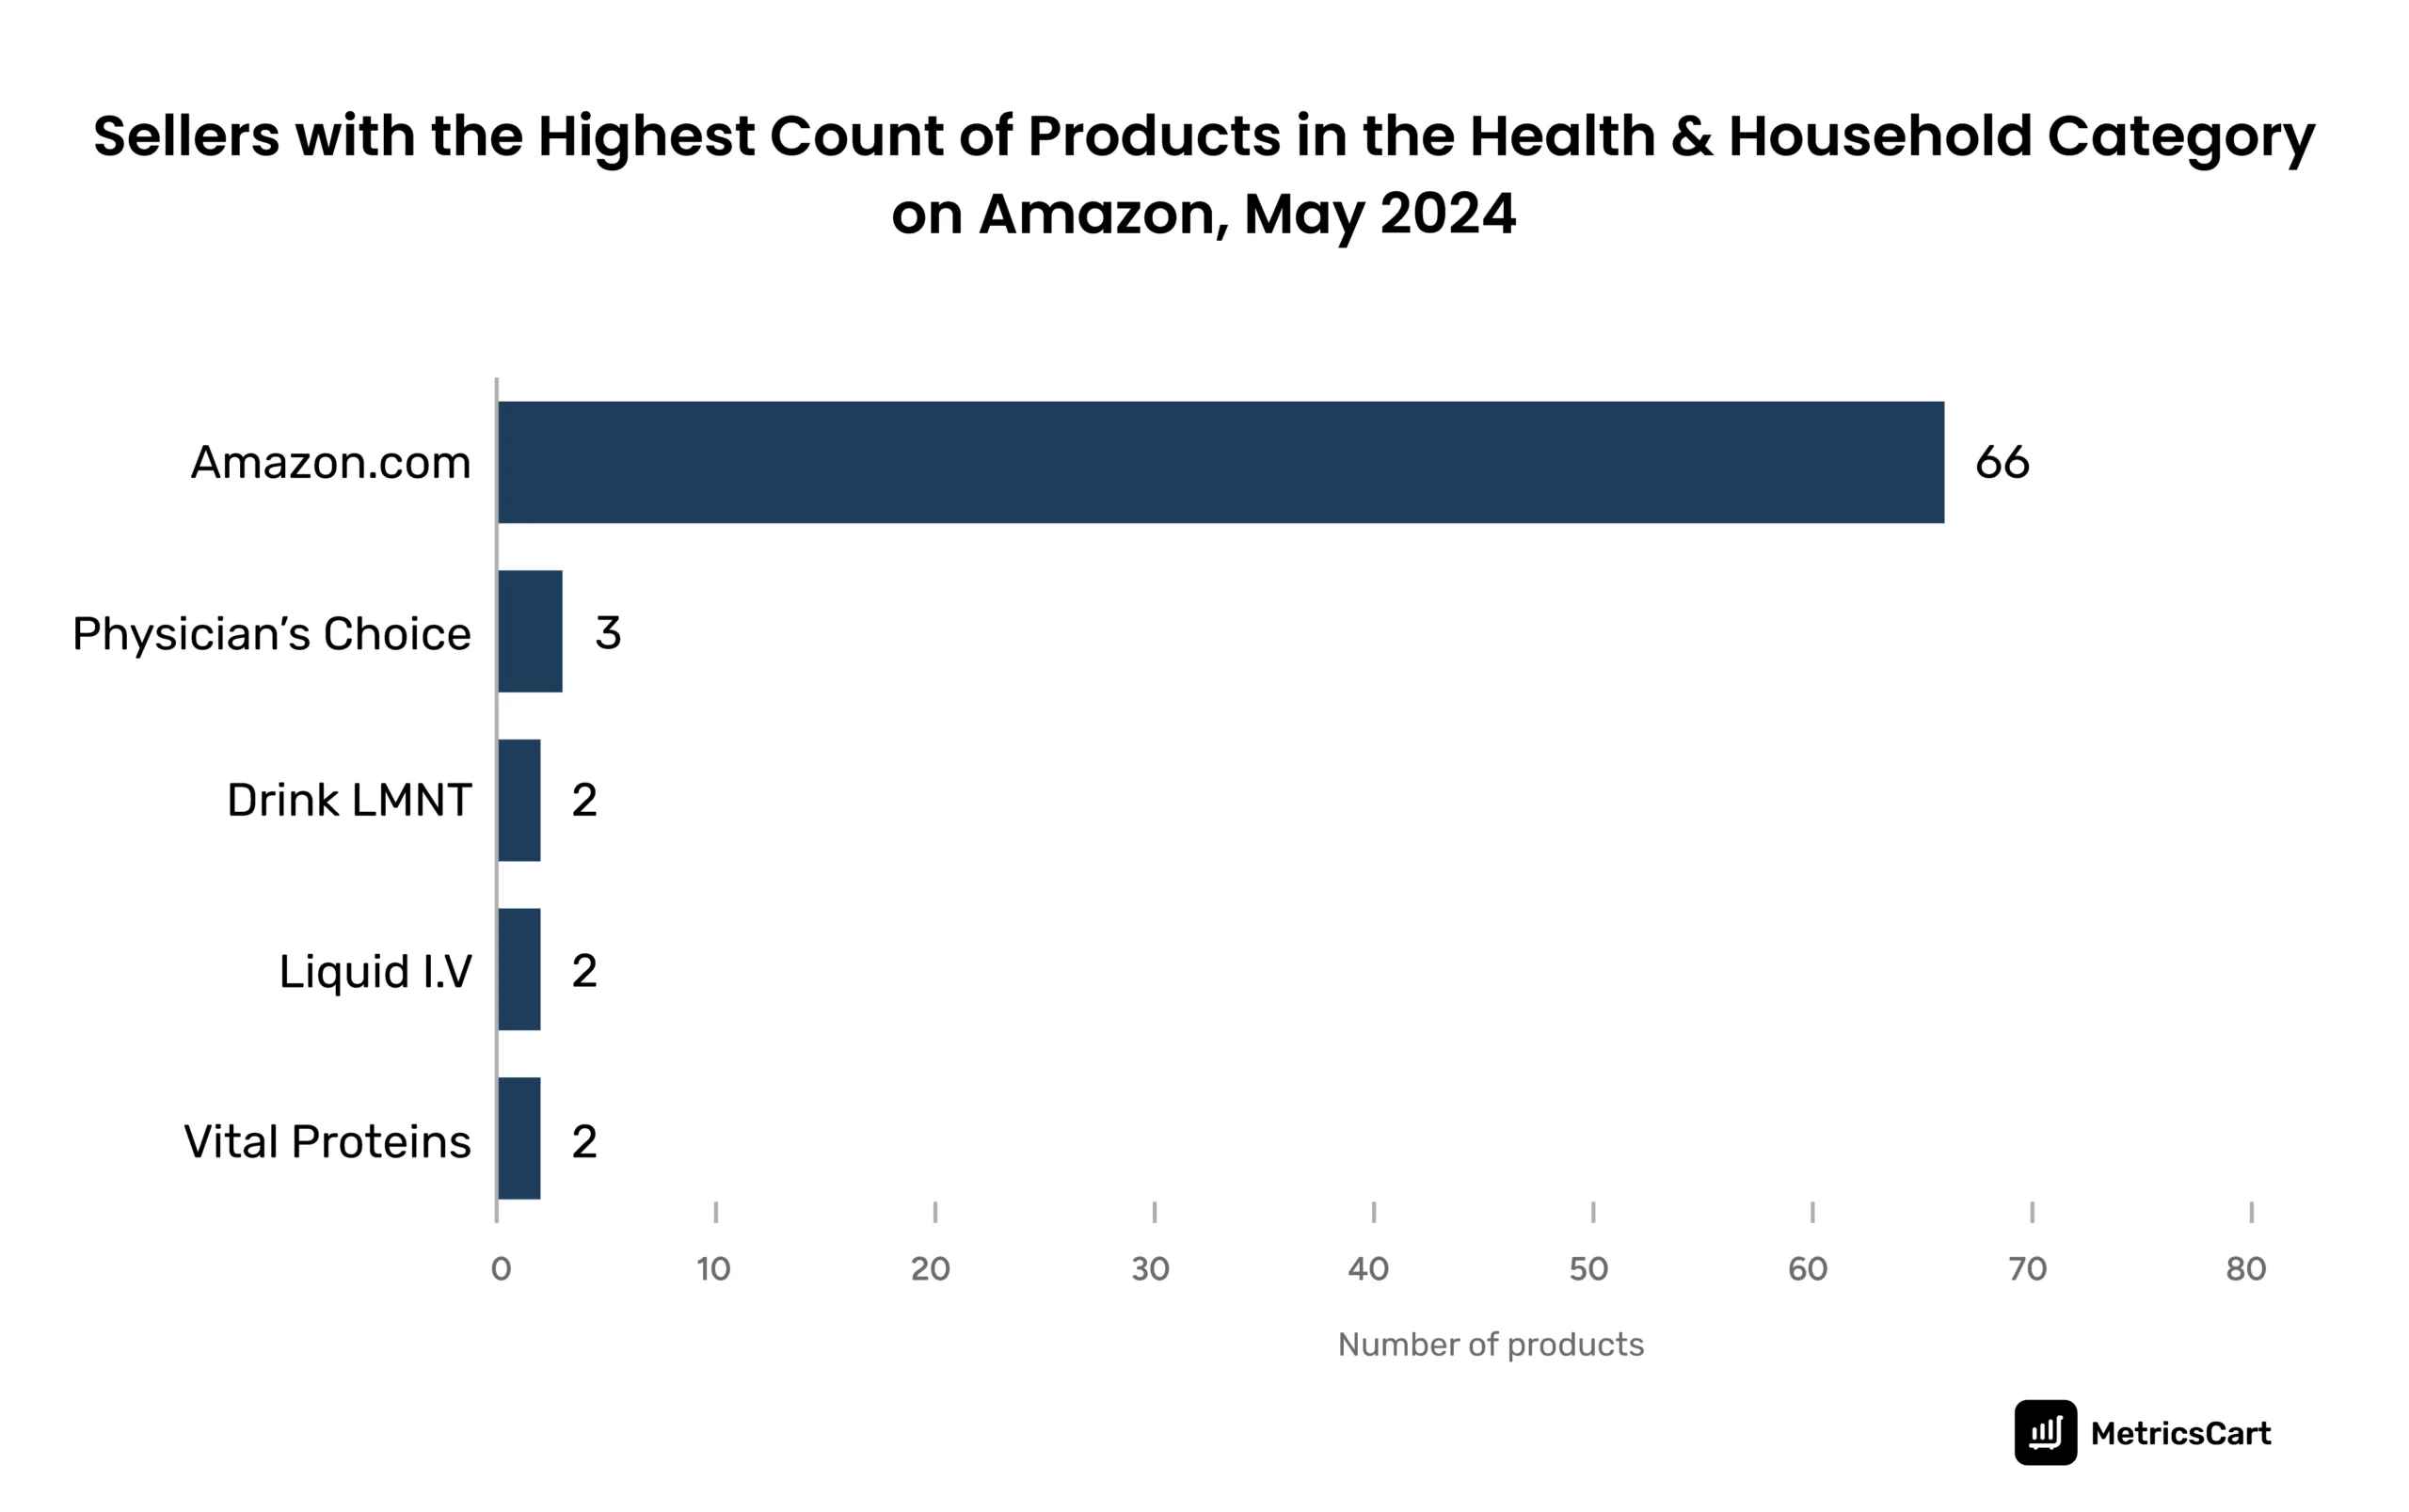 The graph shows Sellers with the Highest Count of Products in the Health & Household Category on Amazon in 2024.